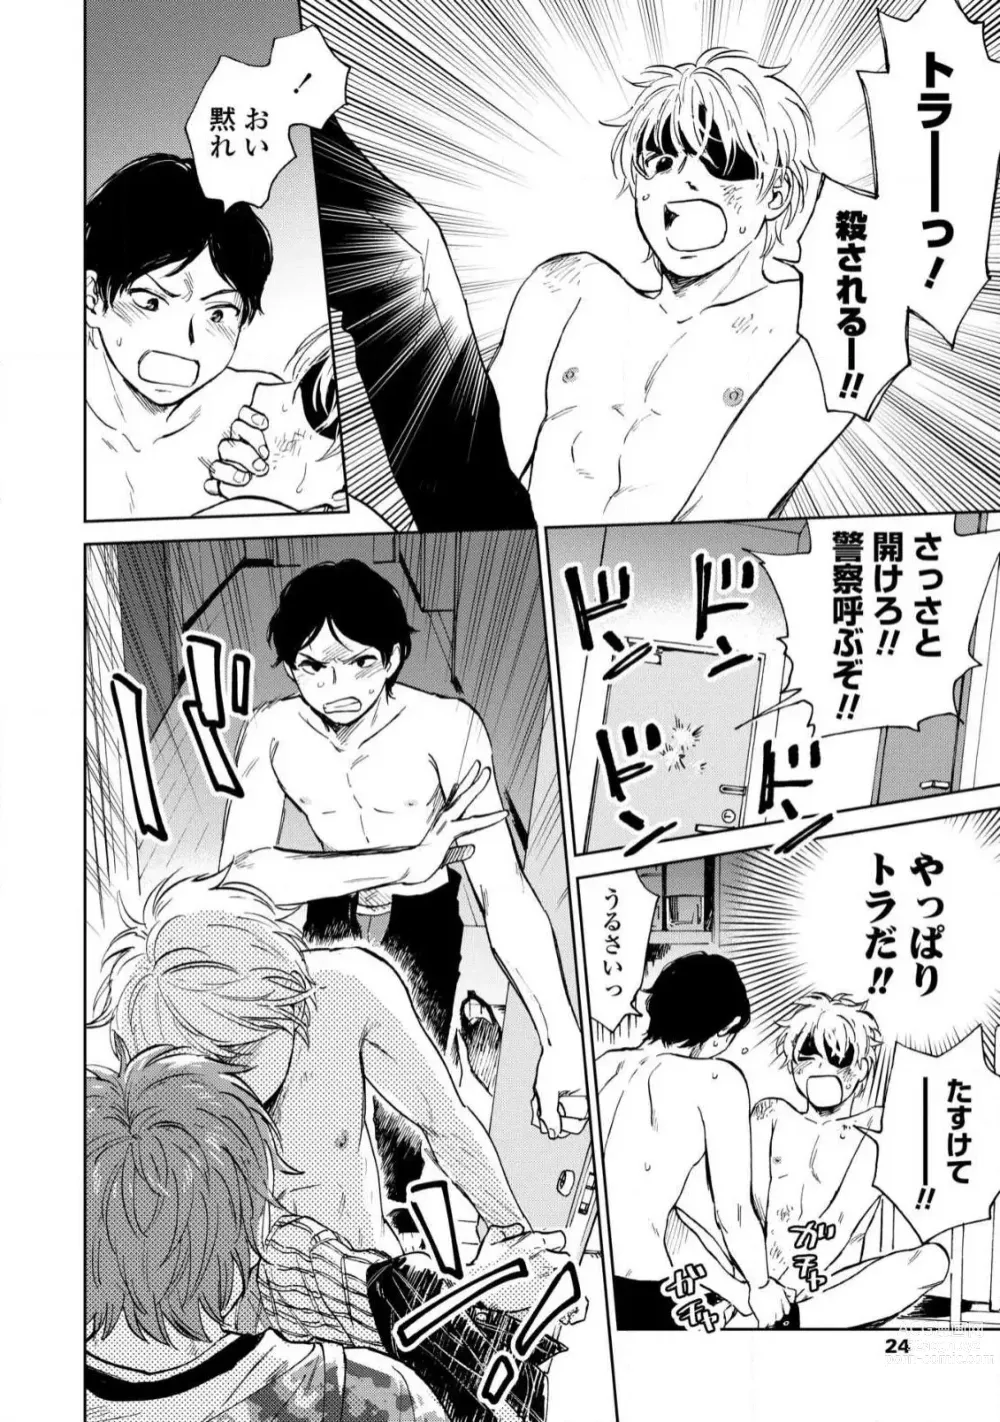 Page 22 of manga Magnet Kyoudai - Magnet Brothers